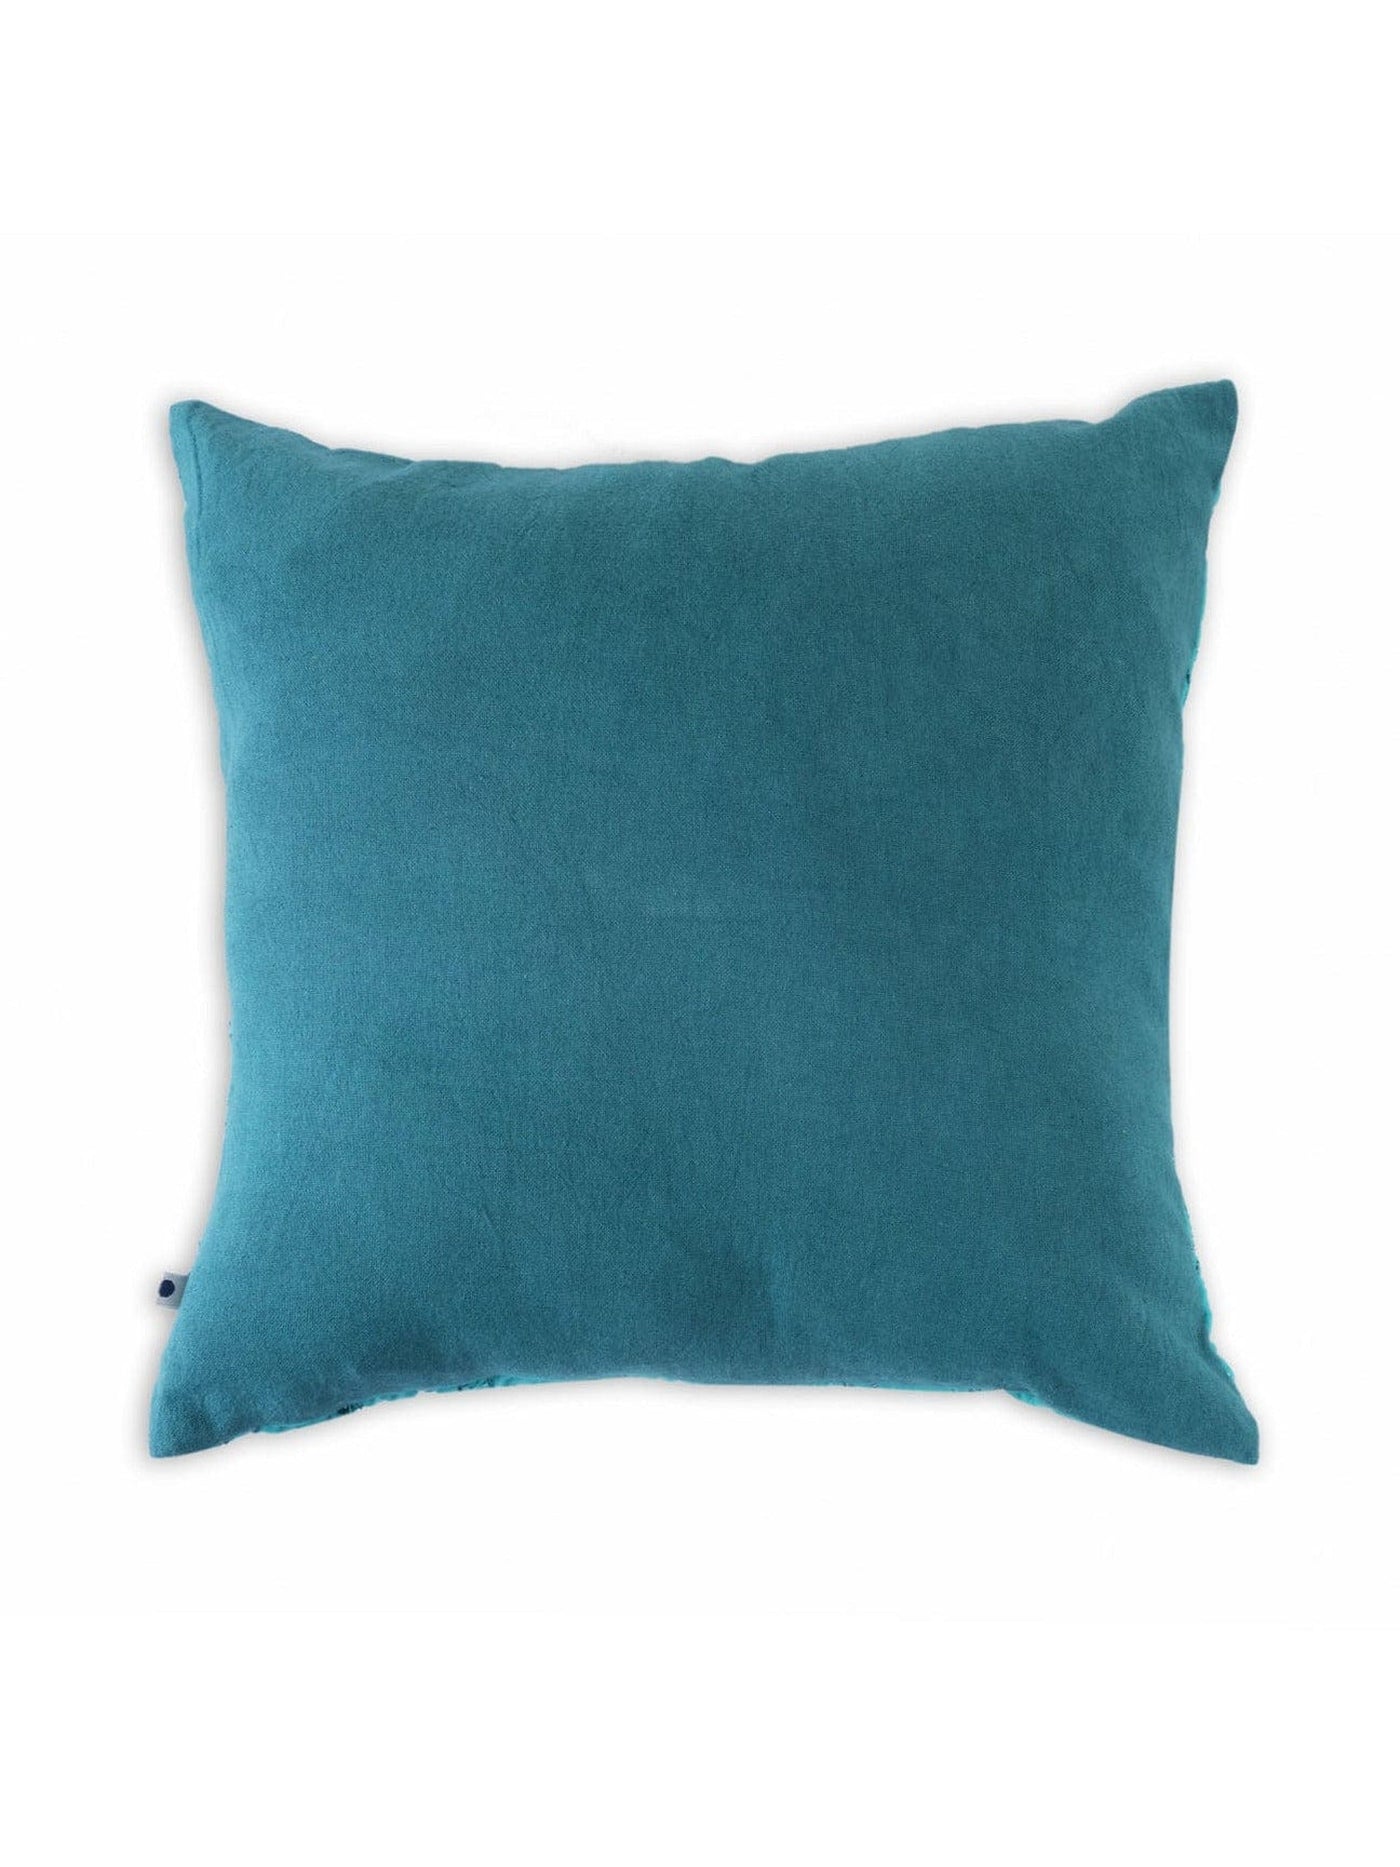 Cushion Cover - Archway Quilted Sea Green